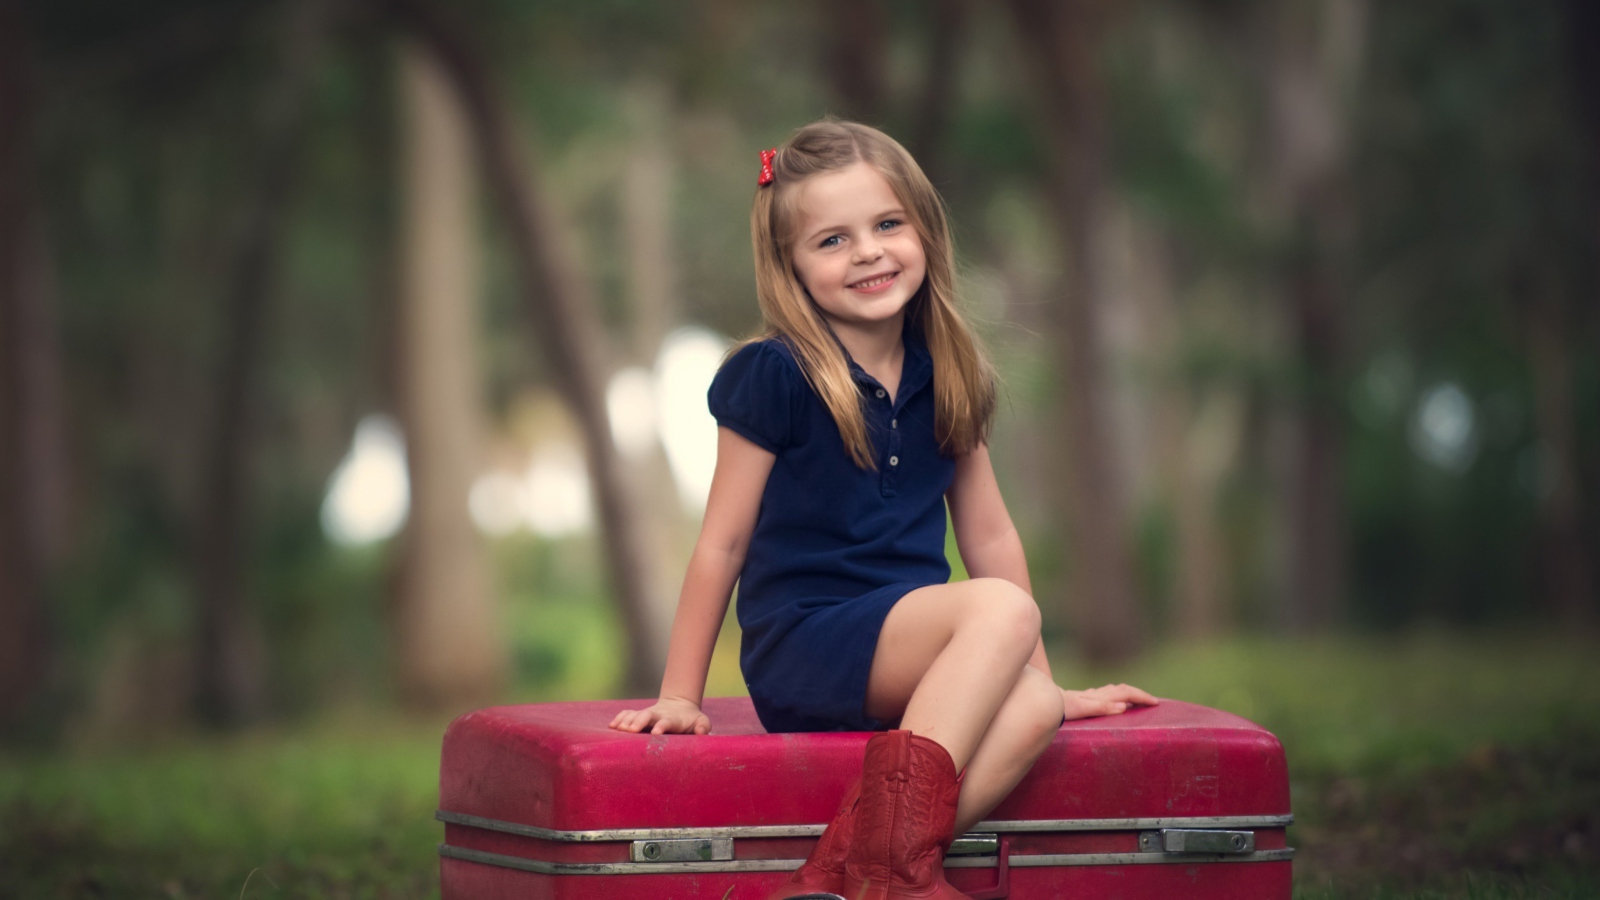 Little Girl Sitting On Red Suitcase screenshot #1 1600x900